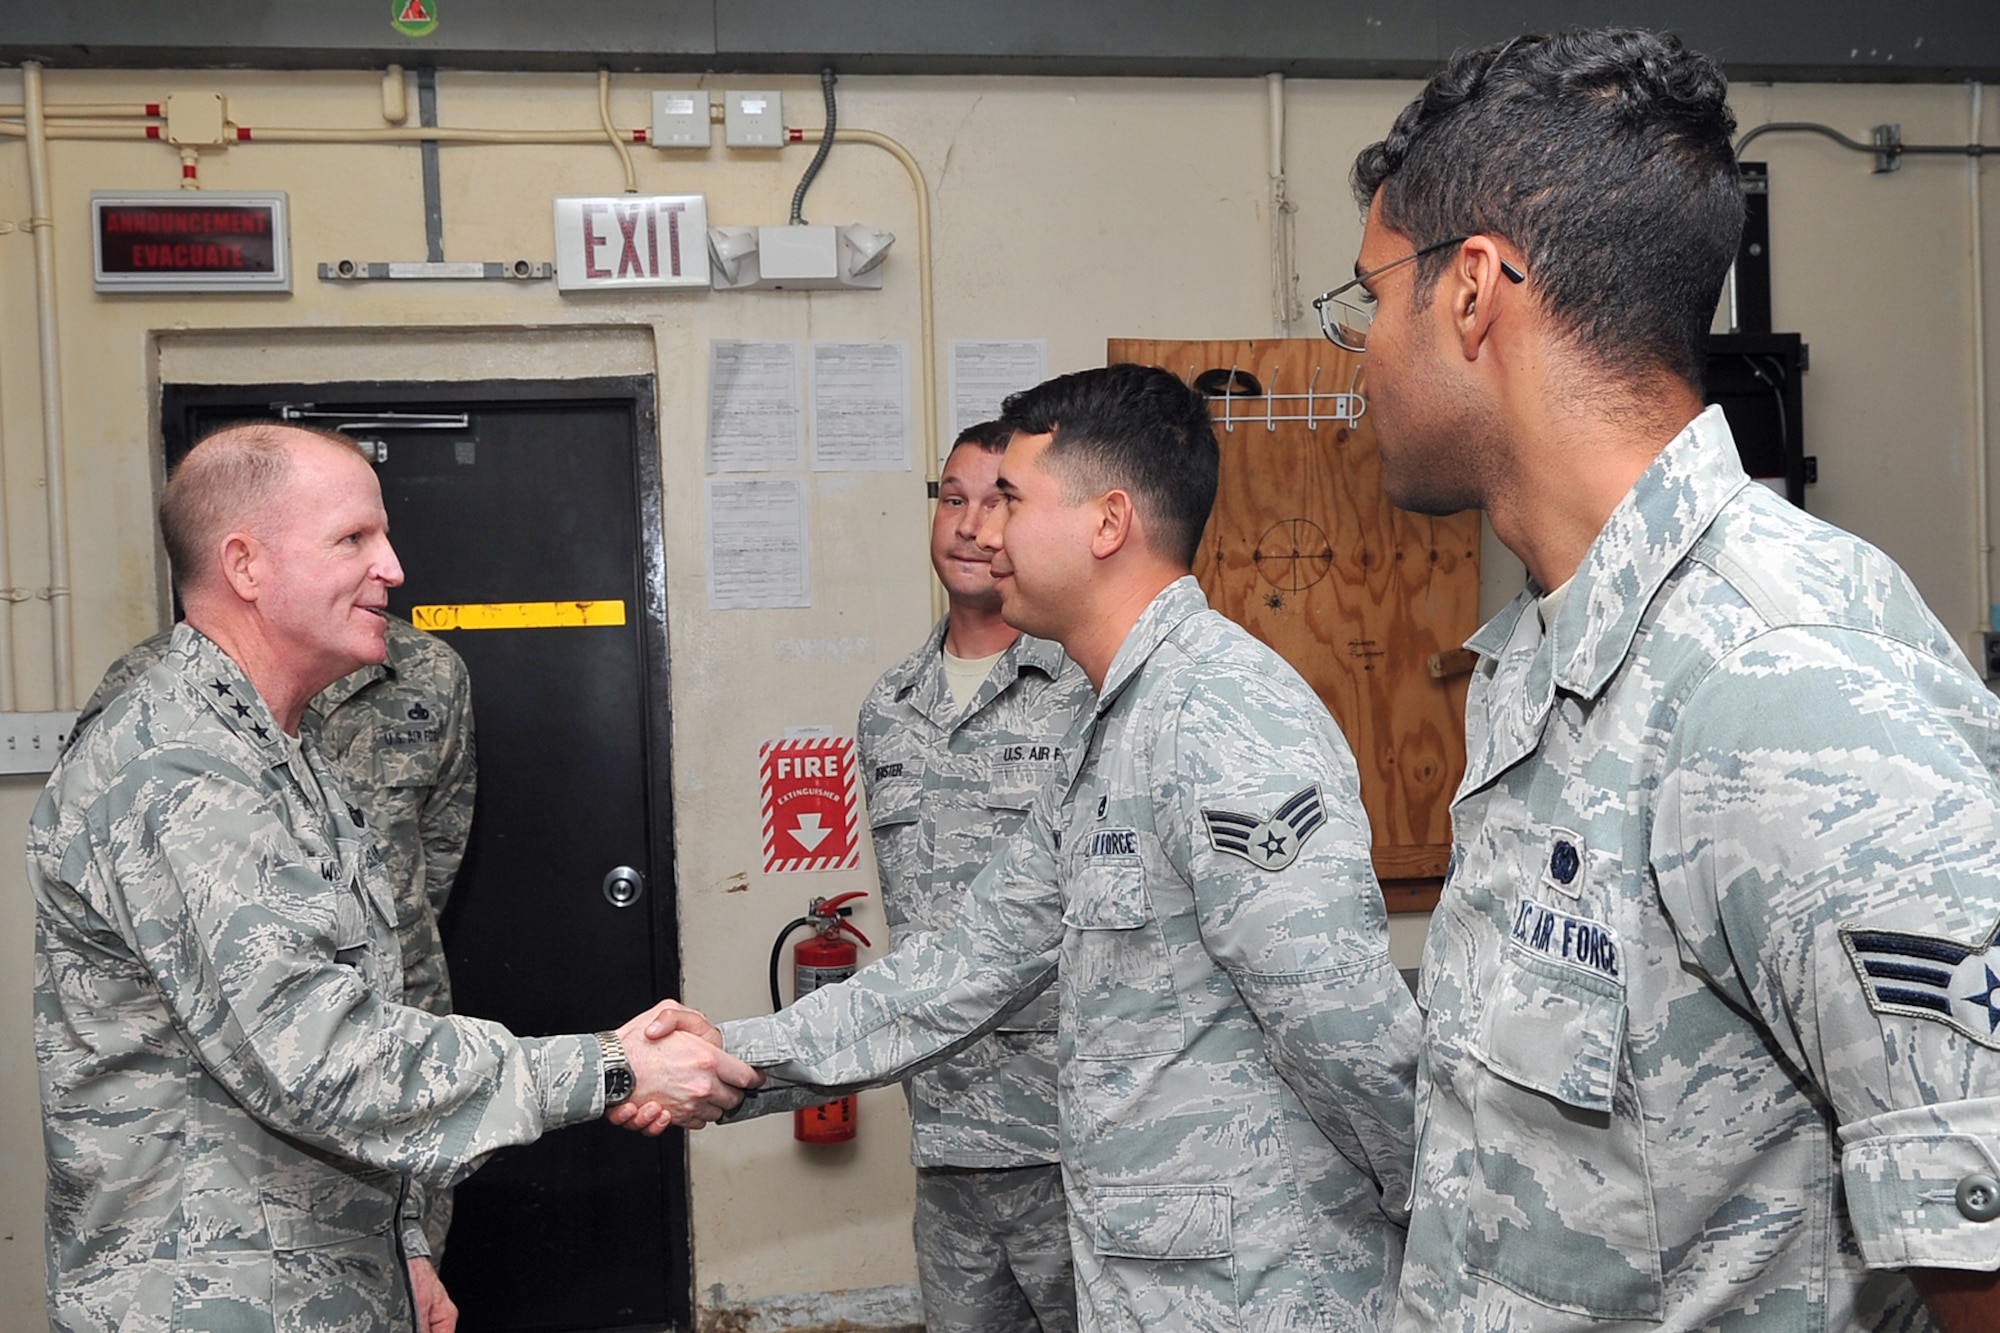 Lt. Gen. Stephen Wilson, commander of Air Force Global Strike Command, recognizes 36th Expeditionary Aircraft Maintenance Squadron Continuous Bomber Presence consolidated tool kit Airmen for their problem-solving initiatives March 3, 2015, at Andersen Air Force Base, Guam. Wilson met one-on-one with Airmen supporting the CBP mission in the Asia-Pacific region as well as recognized a handful of them who came up with problem-solving initiatives during their deployment here. (U.S. Air Force photo by Staff Sgt. Melissa B. White/Released)